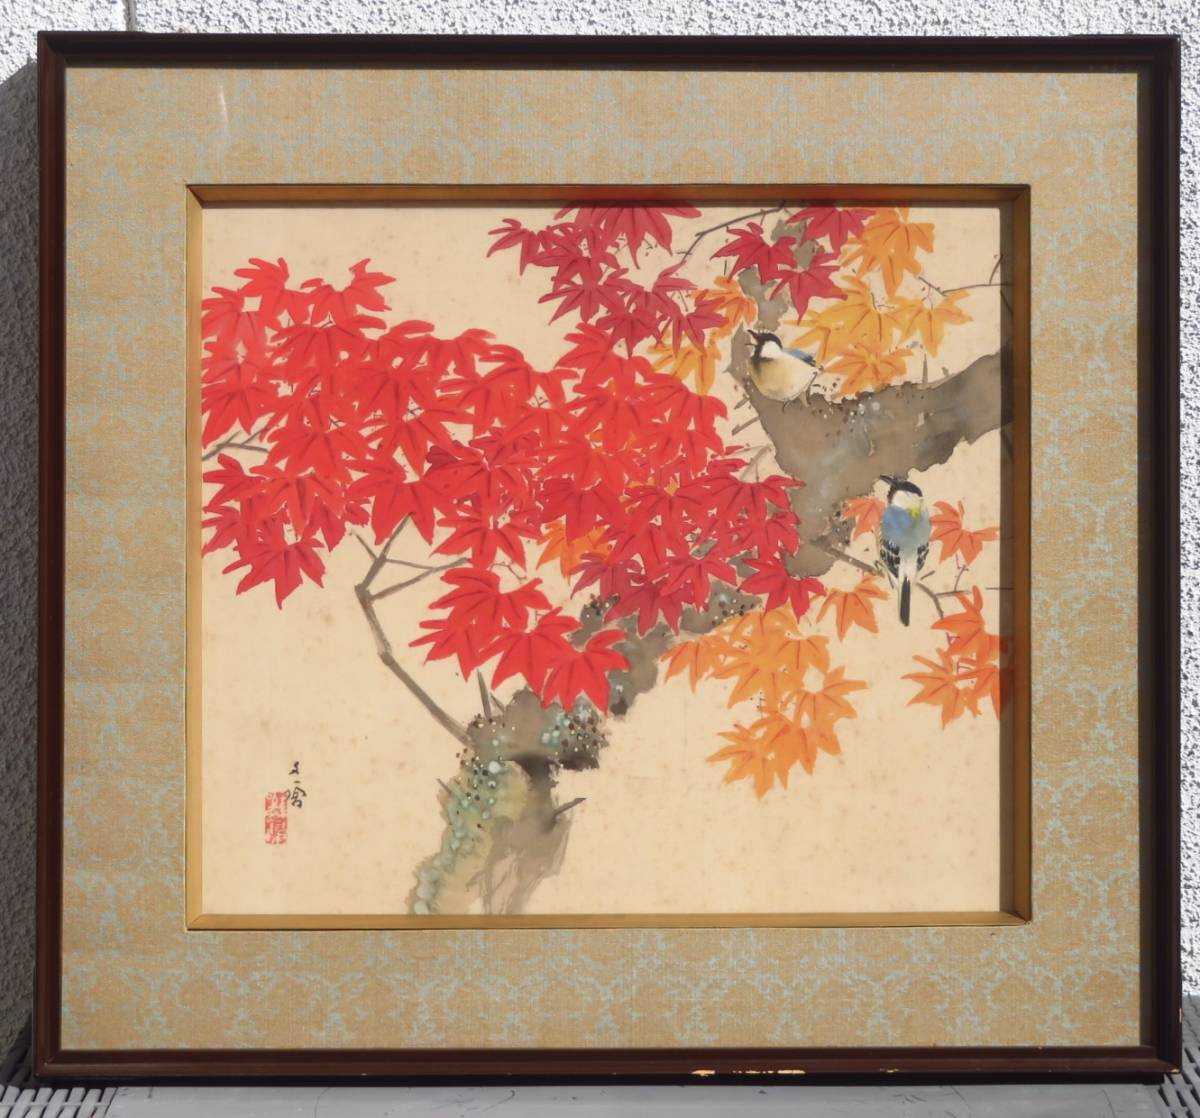 Art work [Autumn leaves / Japanese painter Hayashi Wentang] Craft painting, landscape painting, fine art, reproduction, antique, antique, artist, signed, oil painting, printing, width 70.3 x height 64, painting, oil painting, Nature, Landscape painting